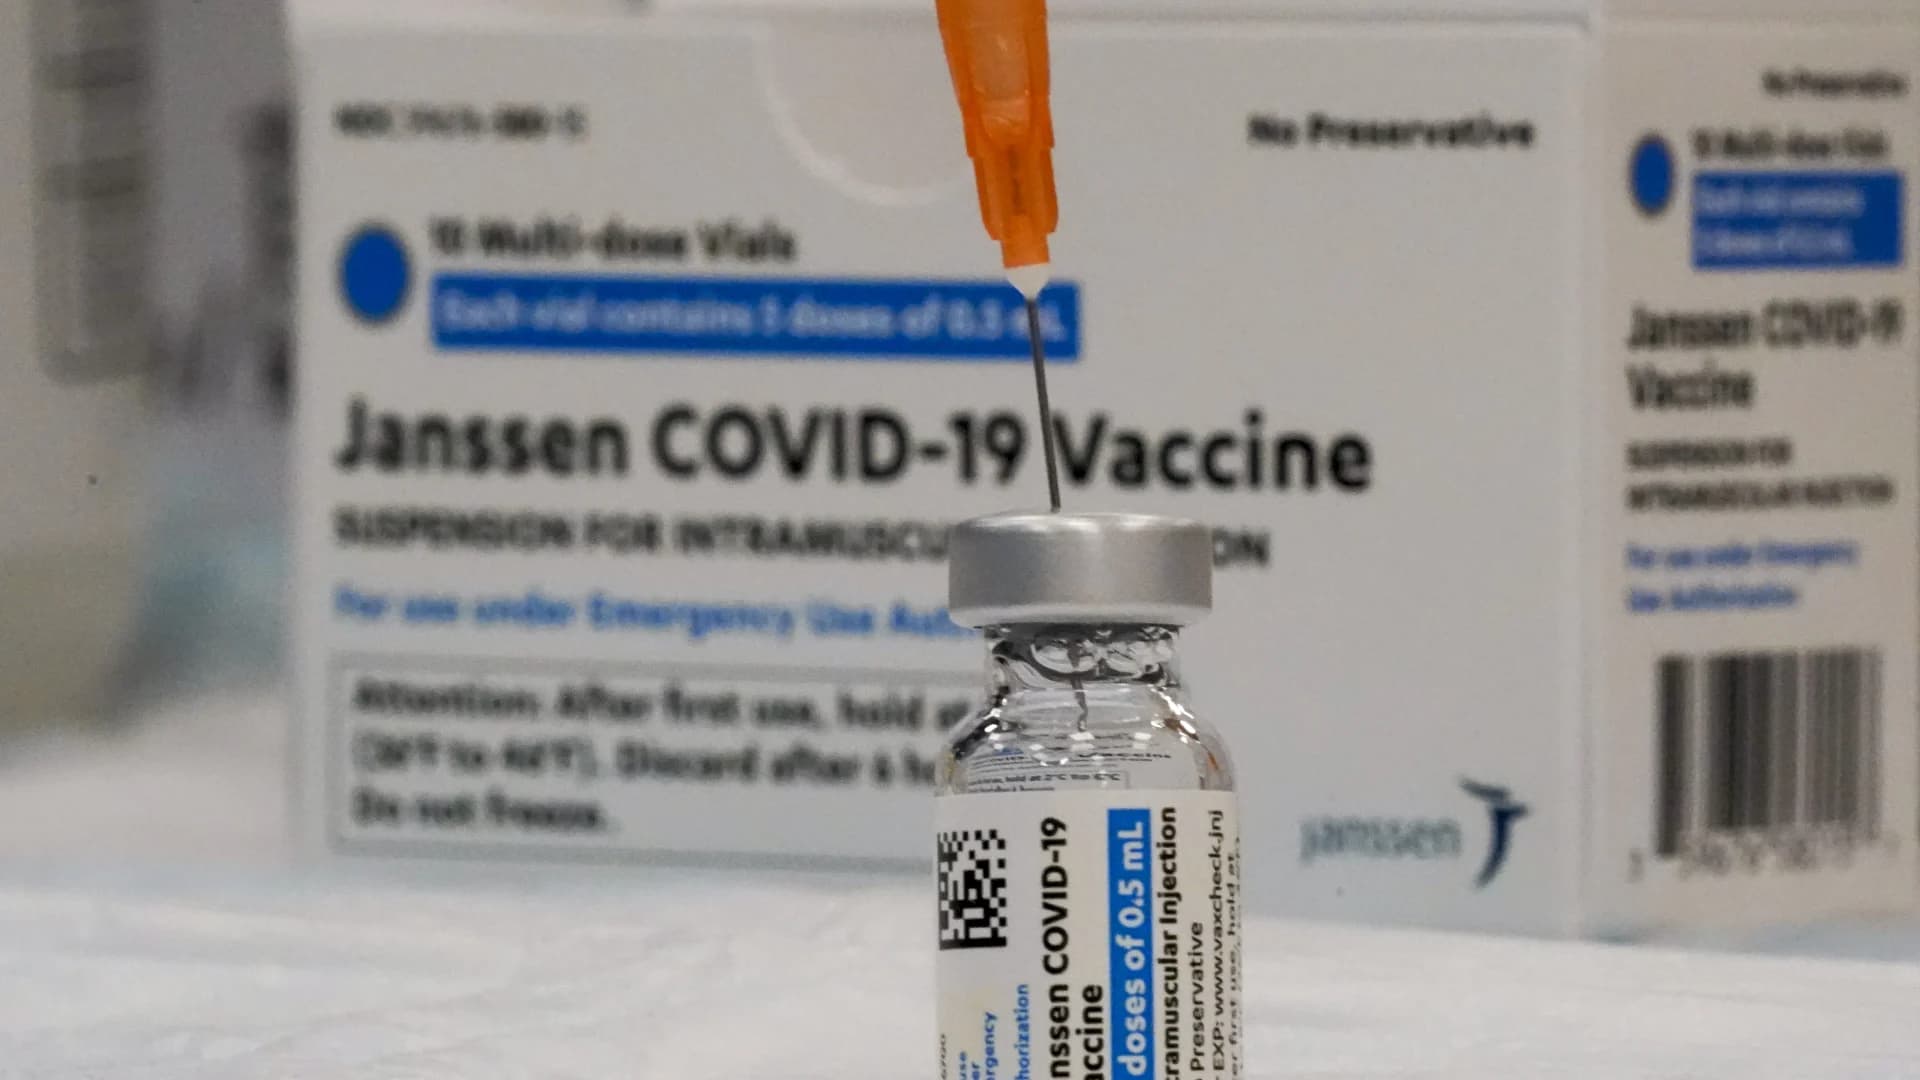 White House: Number of Americans fully vaccinated tops 100 million